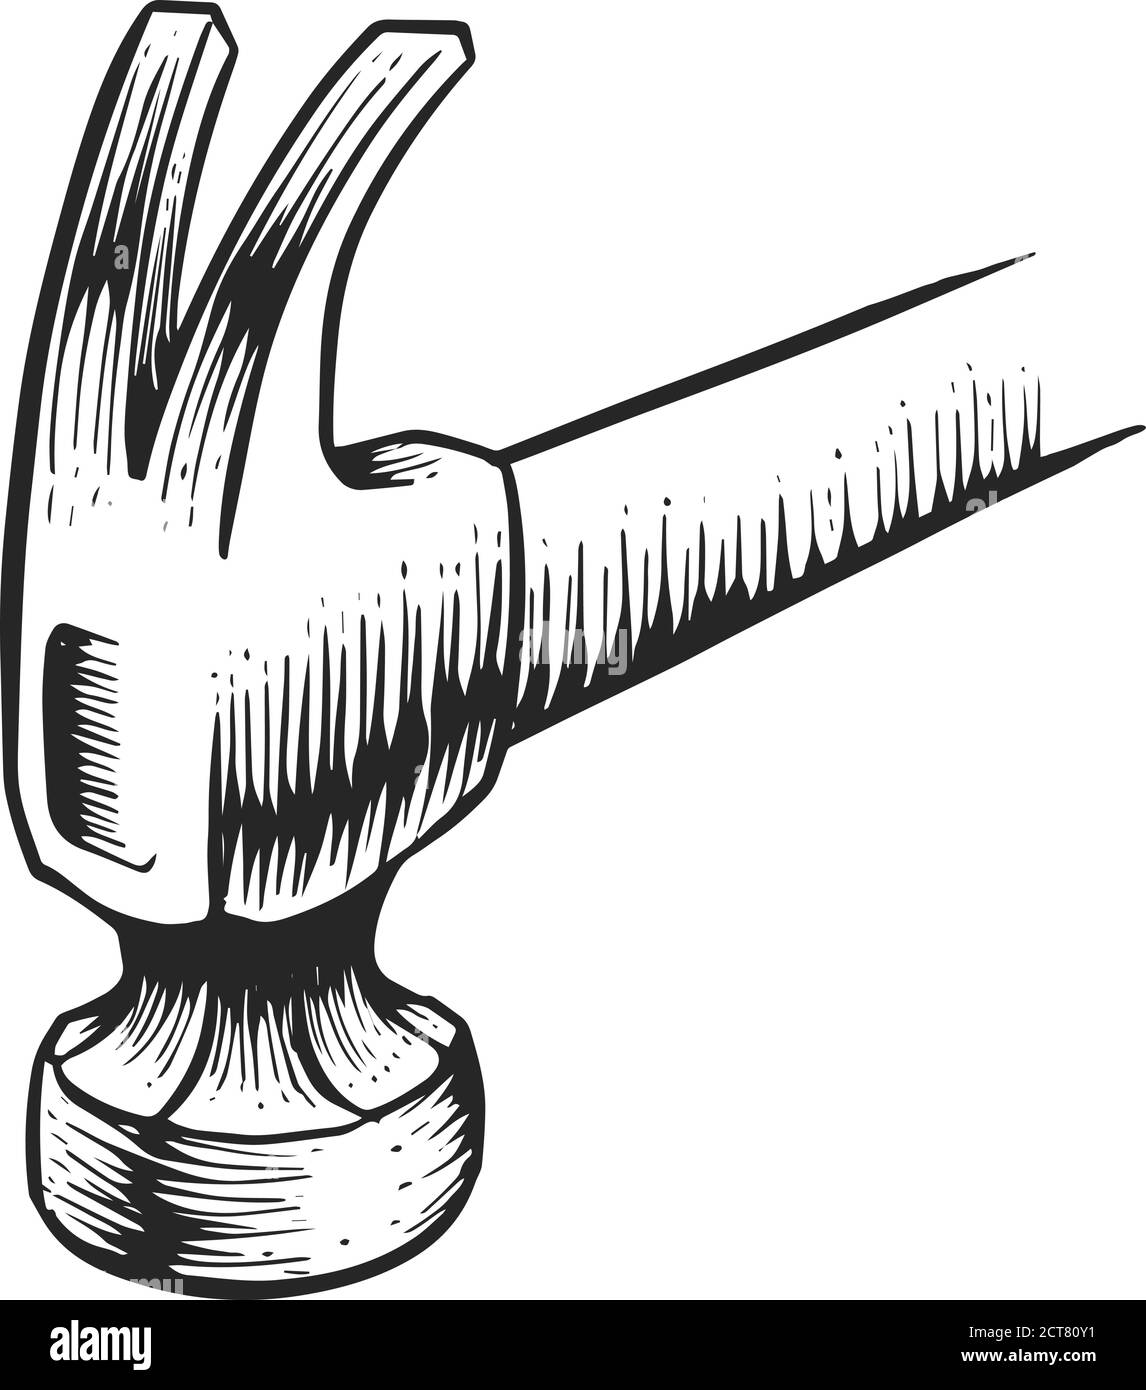 How to Draw a Hammer Step by Step  EasyLineDrawing